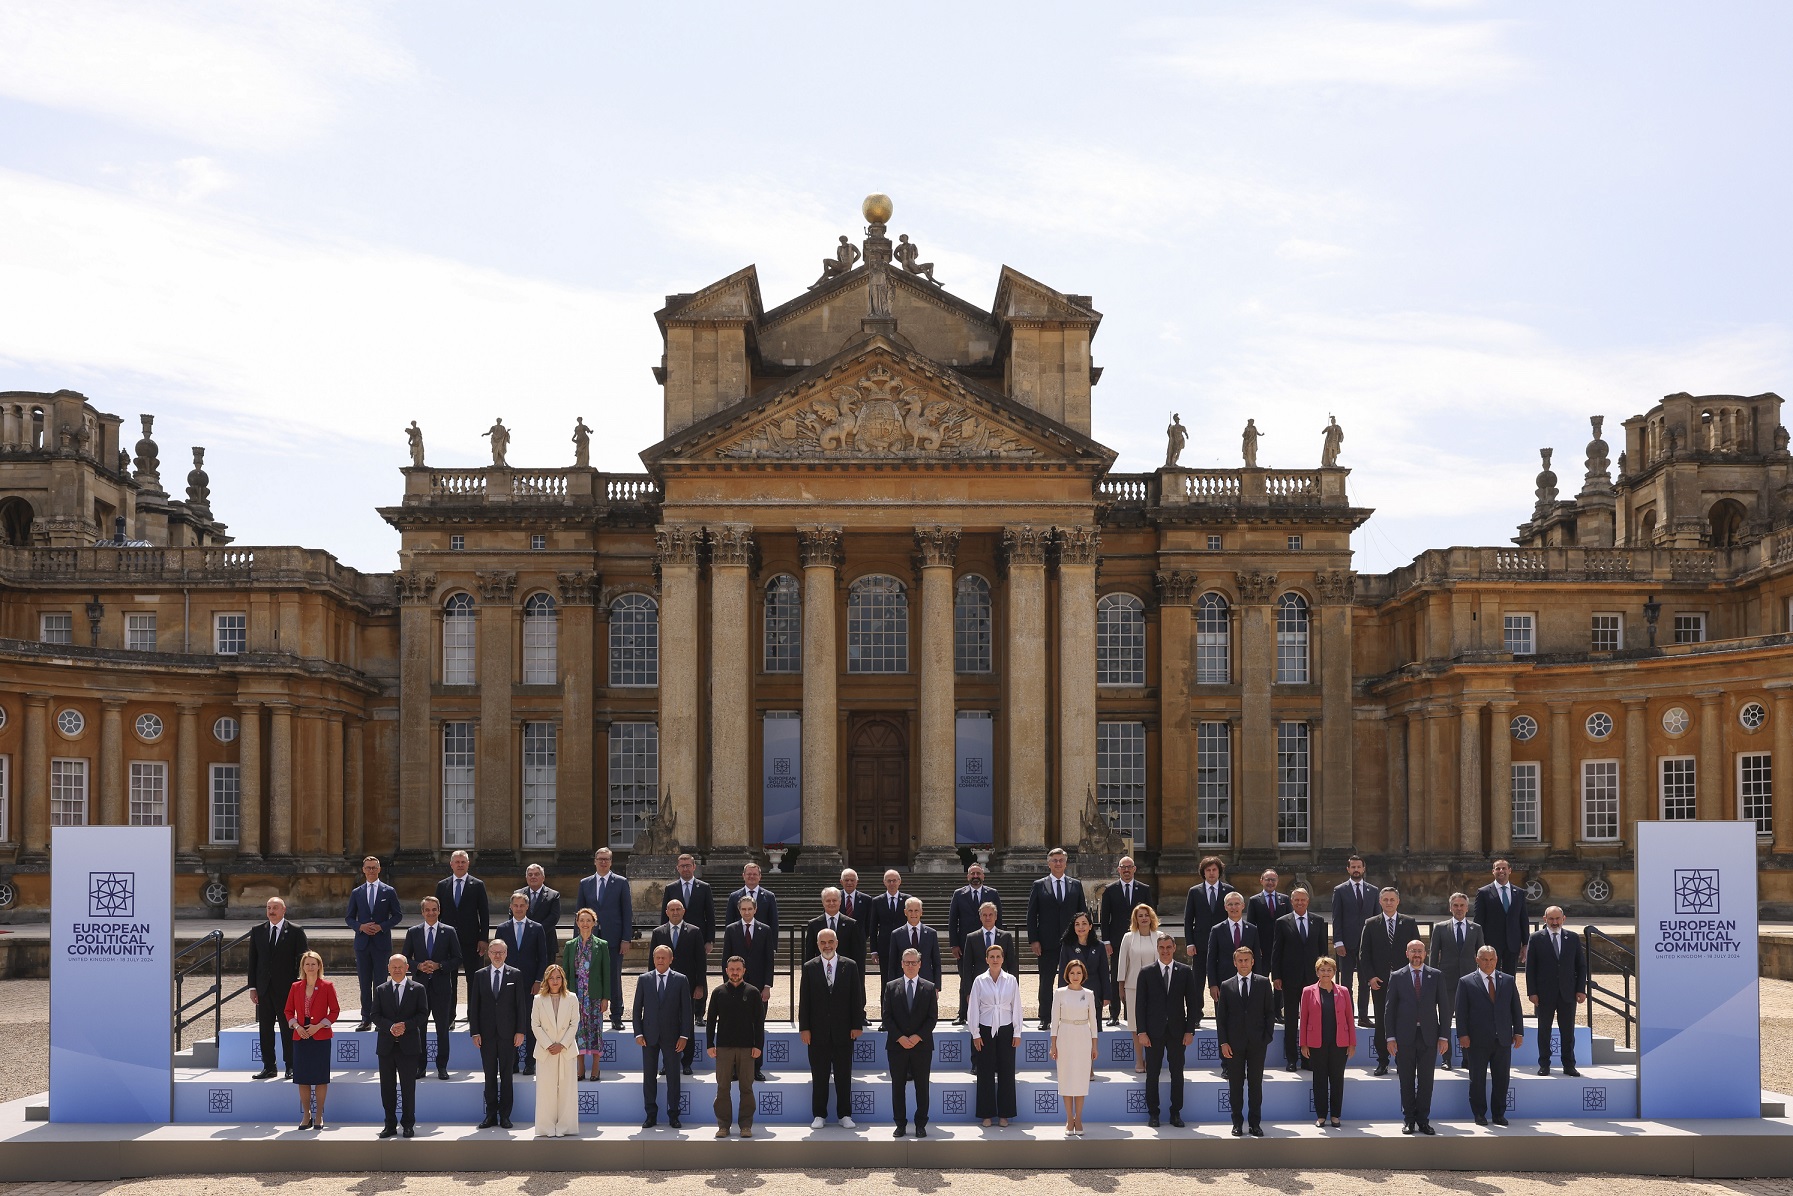 The Minister of State represents Monaco at the 4th meeting of the European Political Community at Blenheim Palace (Oxfordshire, United Kingdom) 